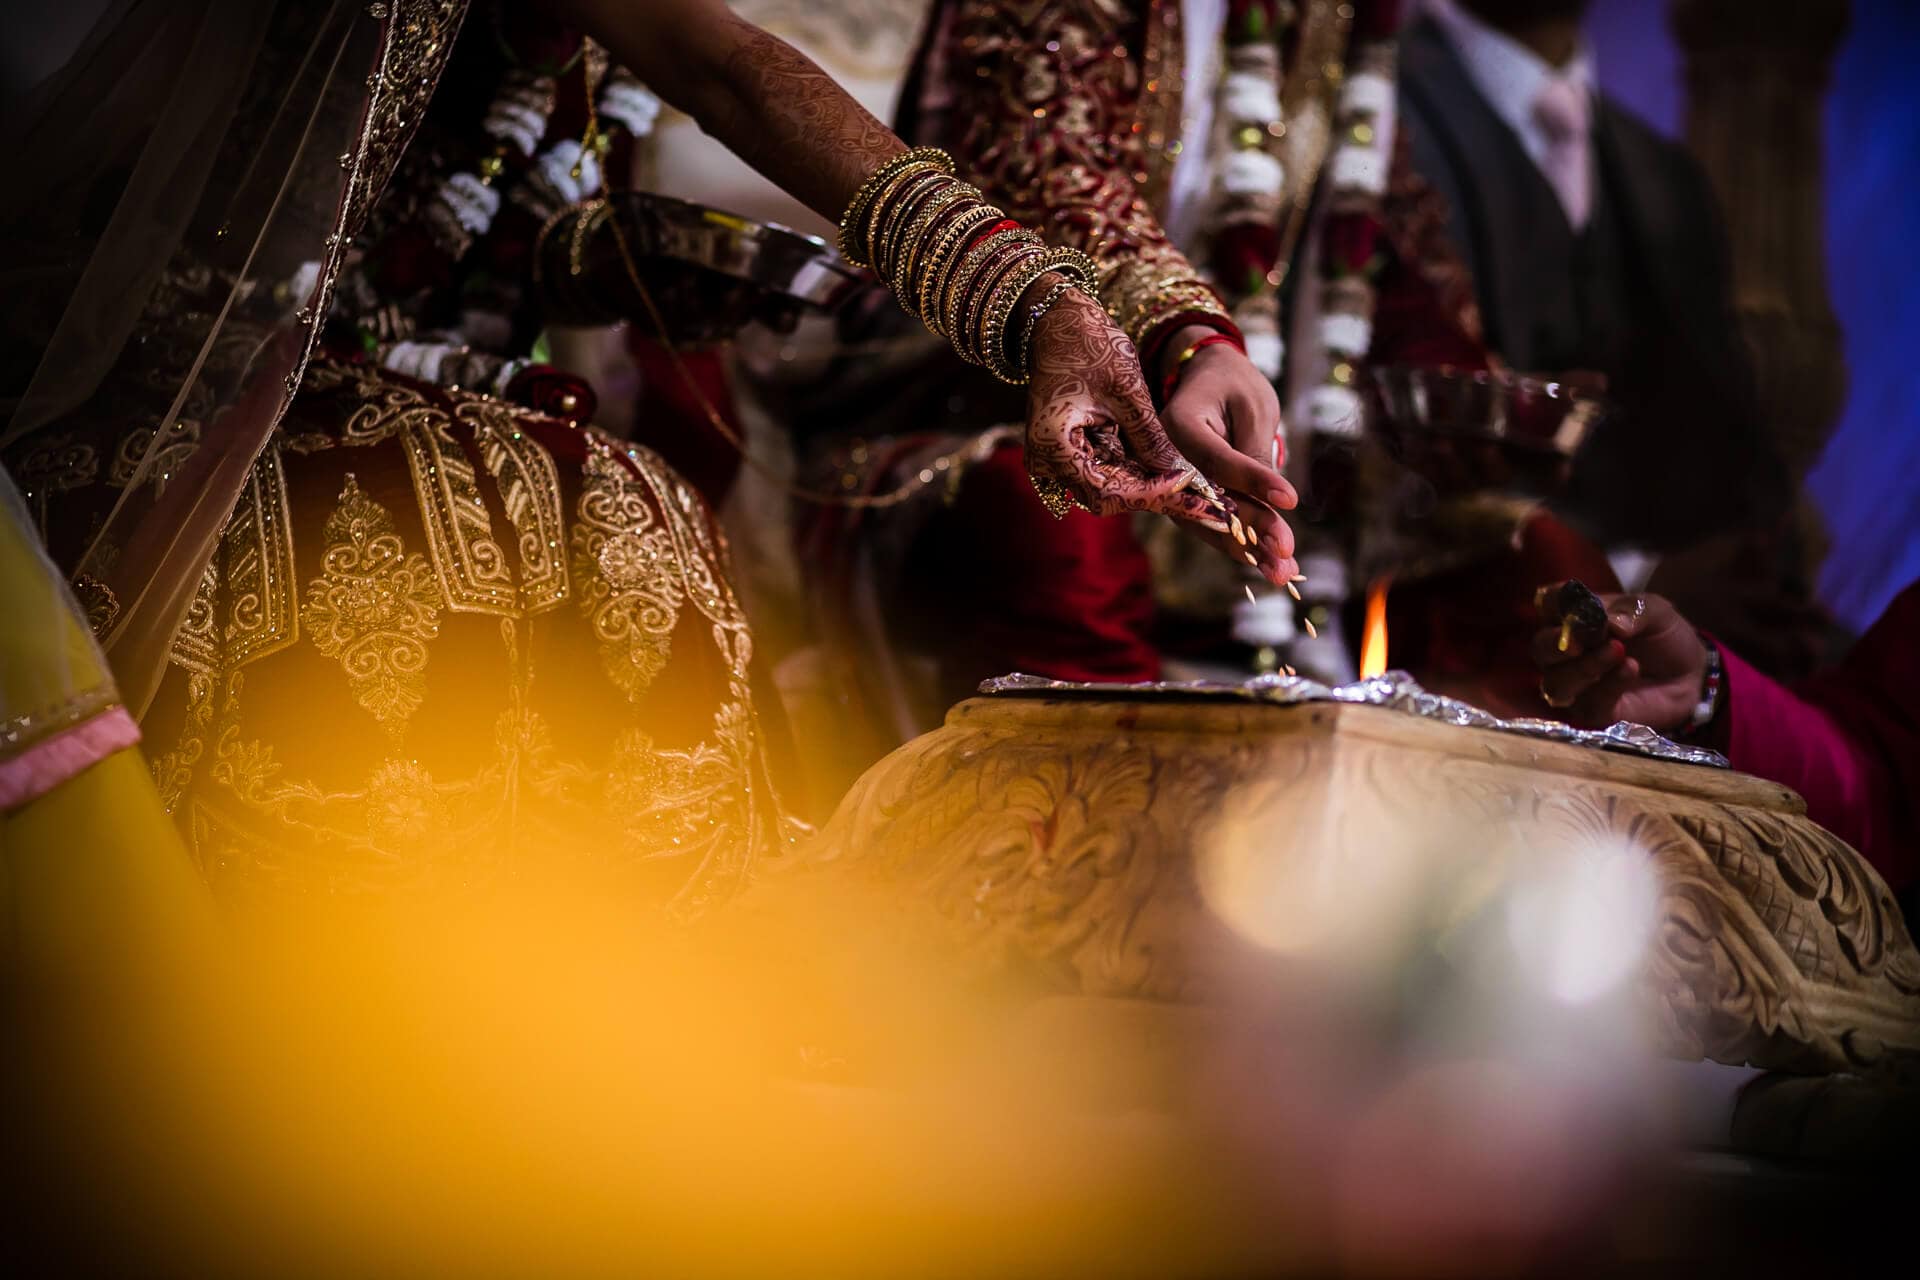 Seeds being poured into the fire during Hindu wedding